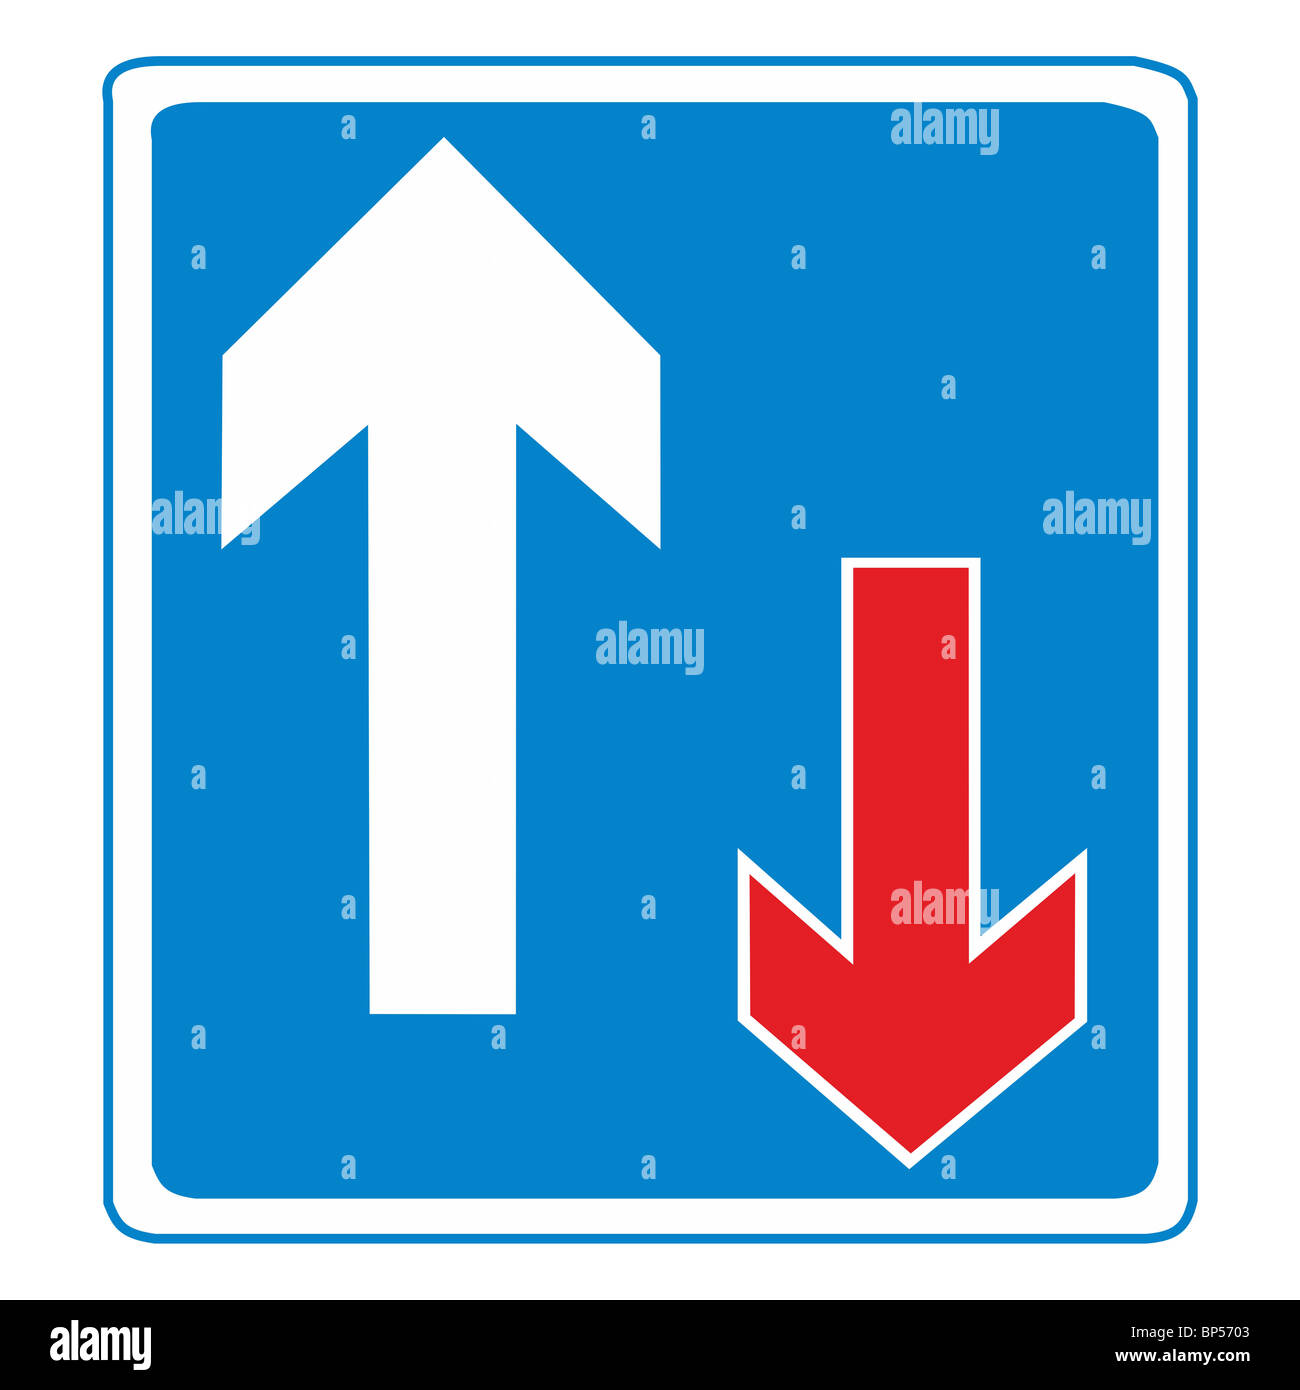 Uk Road Sign Priority Over Oncoming Traffic Ahead Arrow Arrow Red And